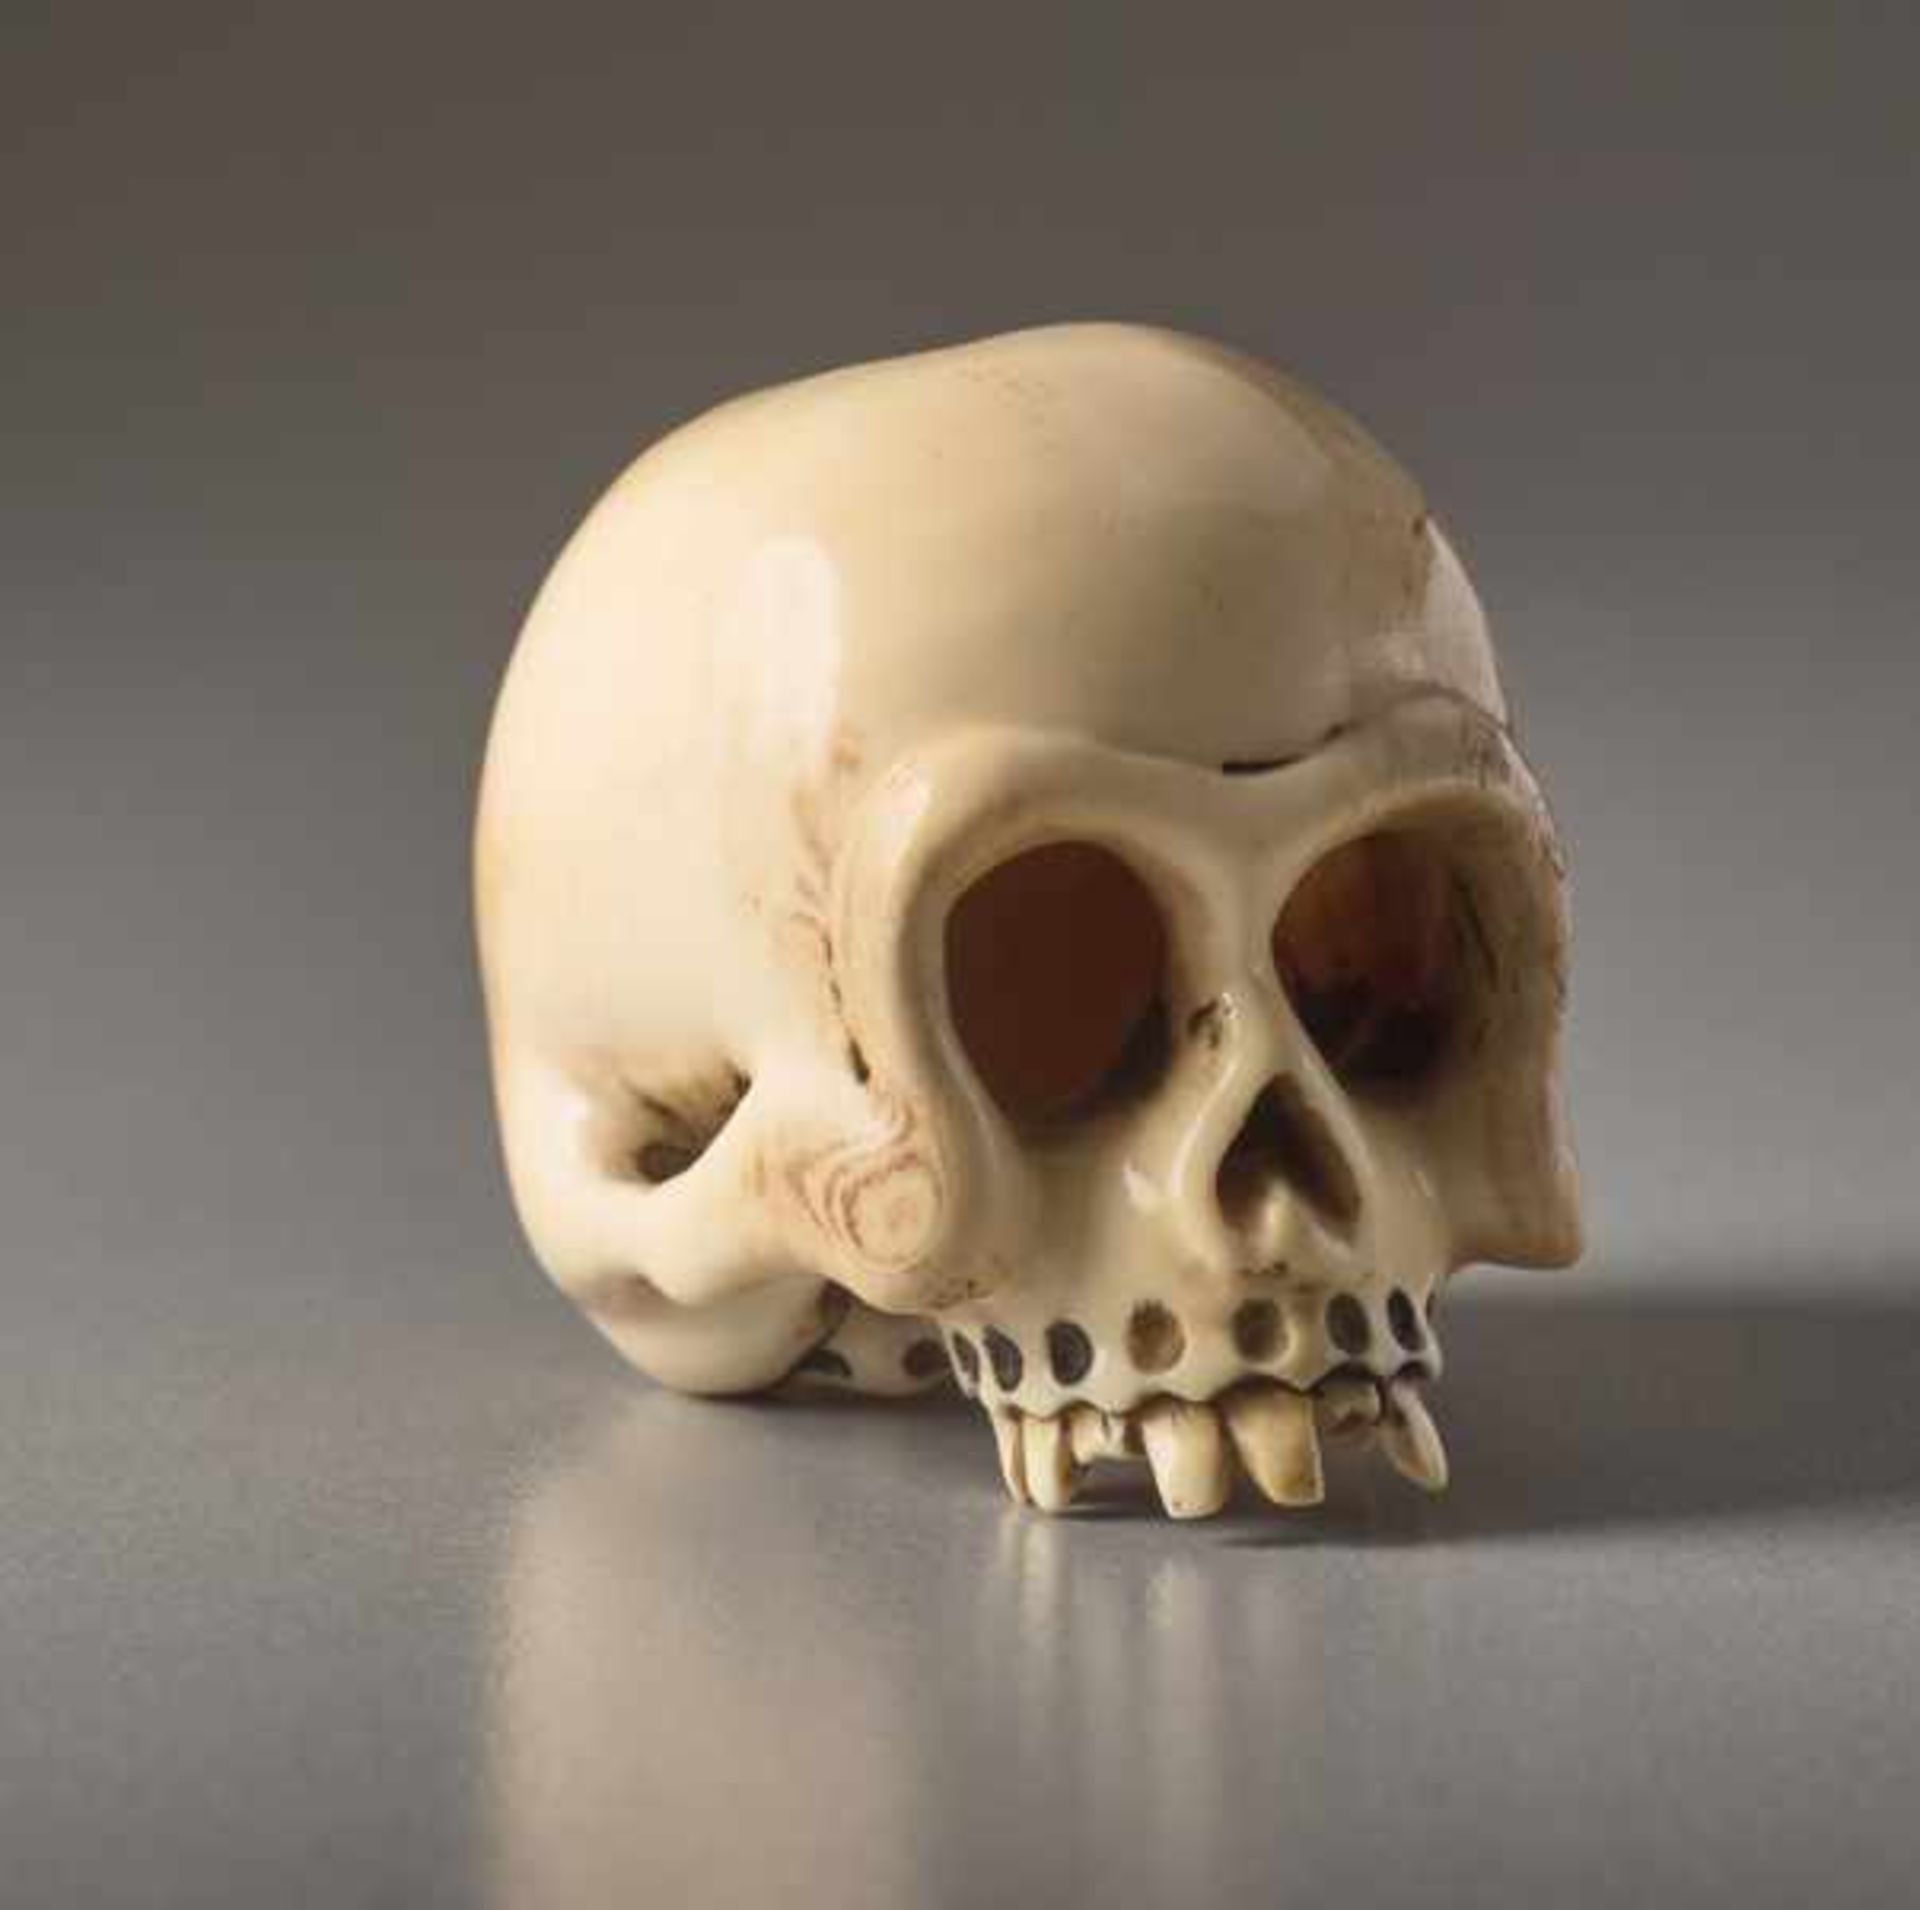 AN IVORY NETSUKE BY SHOZAN OF A SKULL Ivory netsuke. Japan, 19th centuryAn excellently crafted, - Image 6 of 7